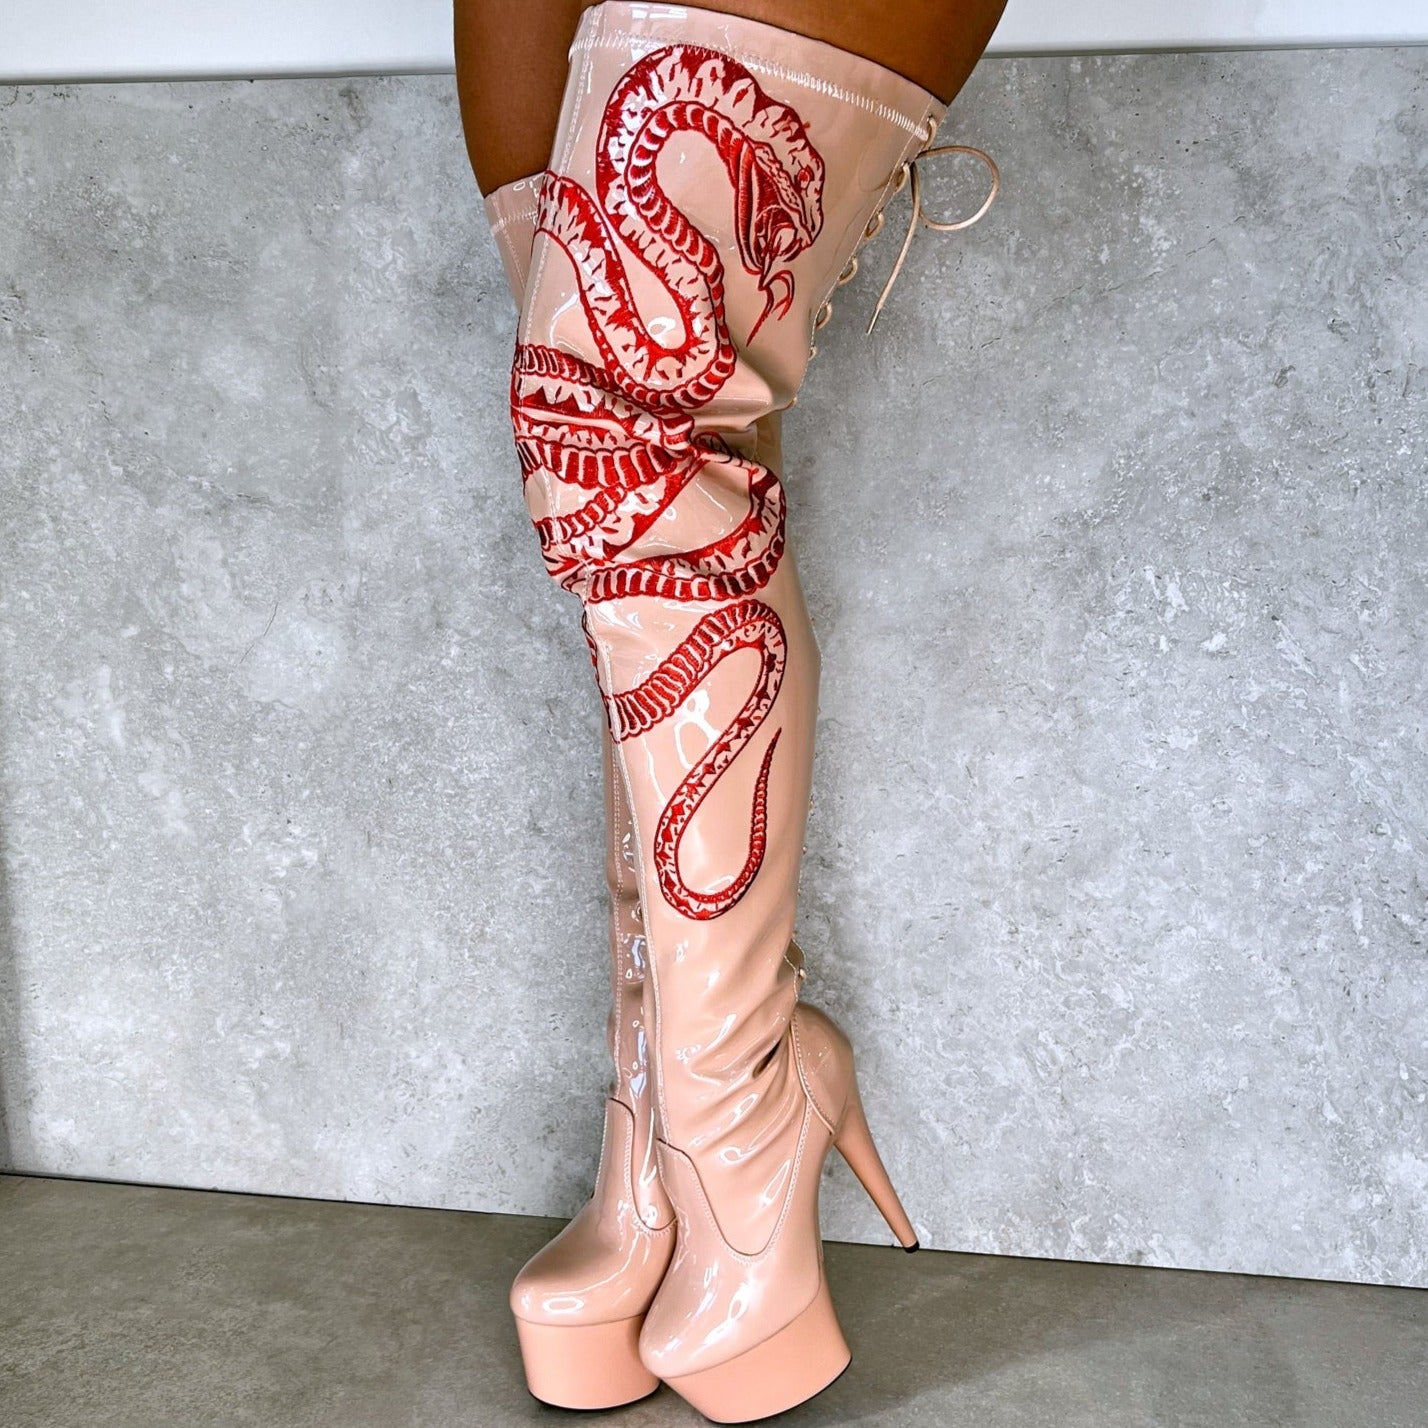 VIPER Boot Tan with Red Thicc Thigh High - 7INCH